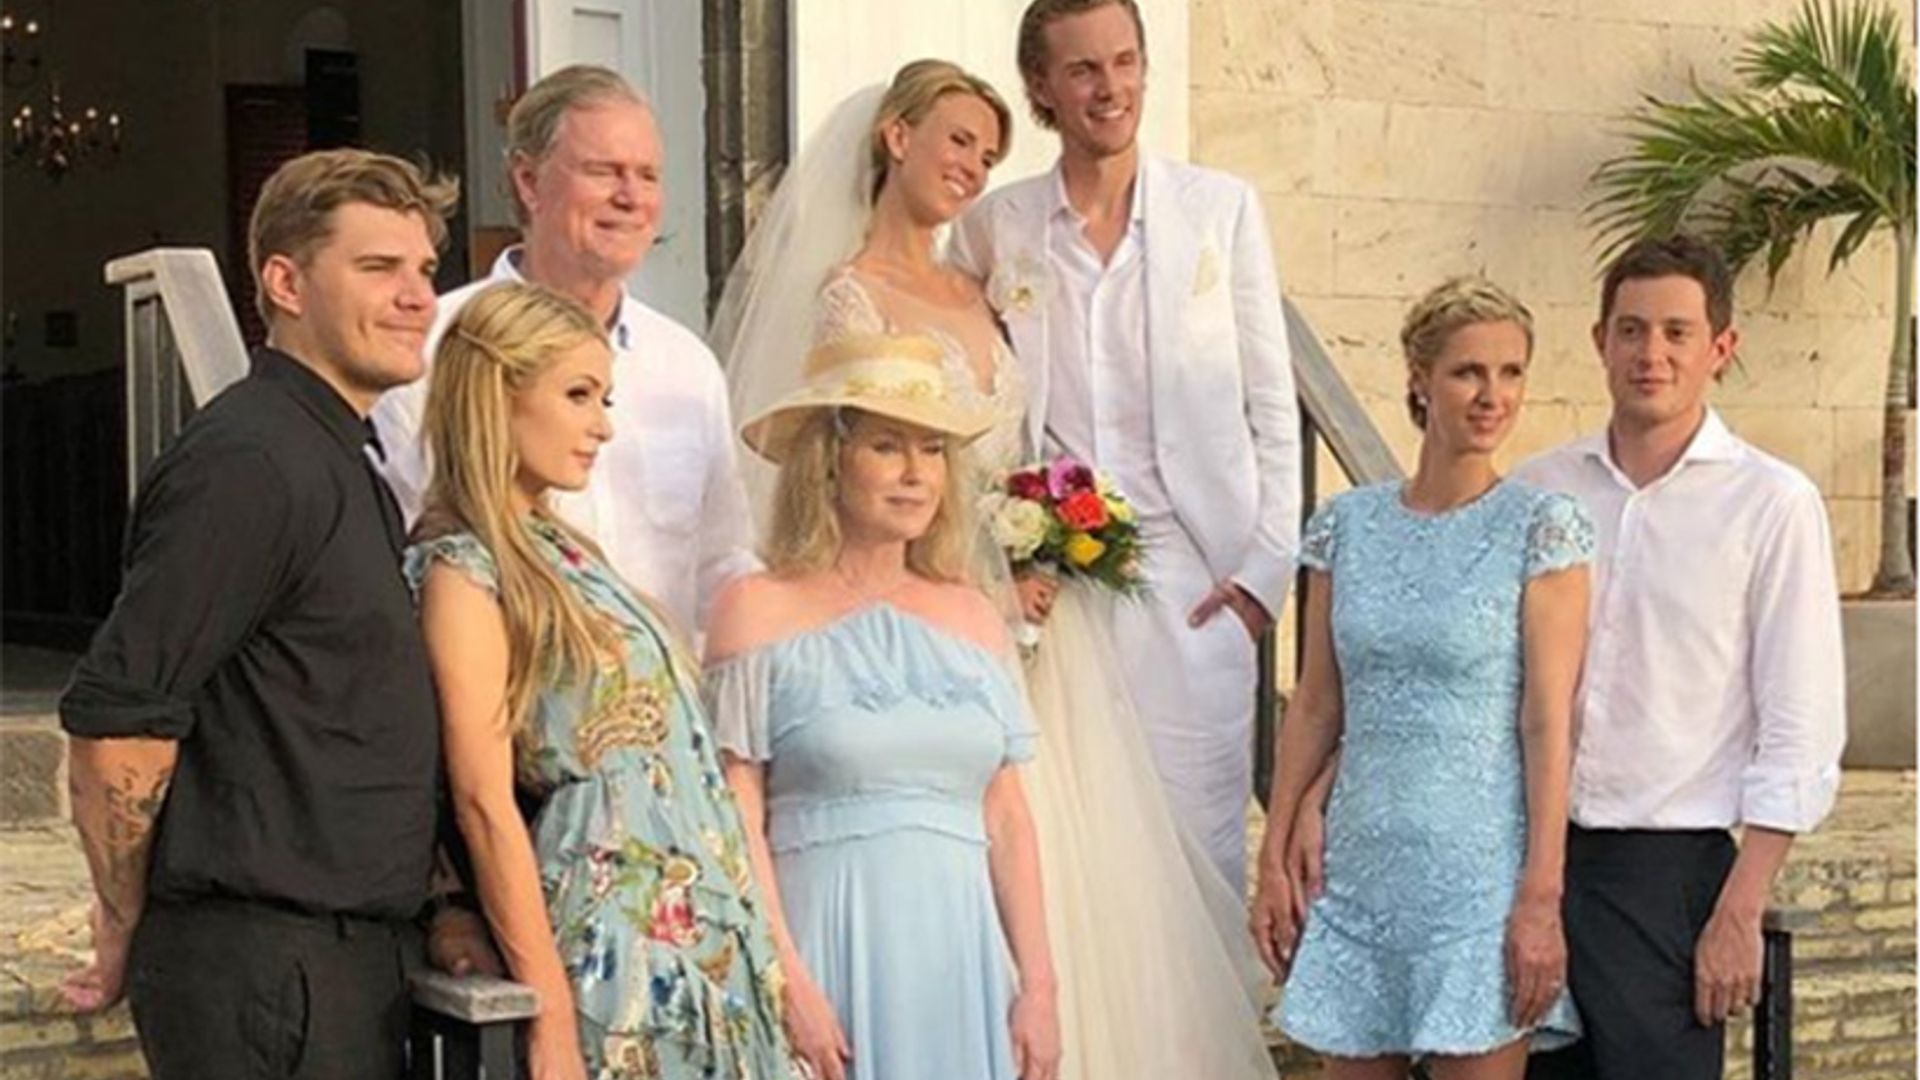 Paris and Nicky Hilton's younger brother Barron gets married: see the stunning bride